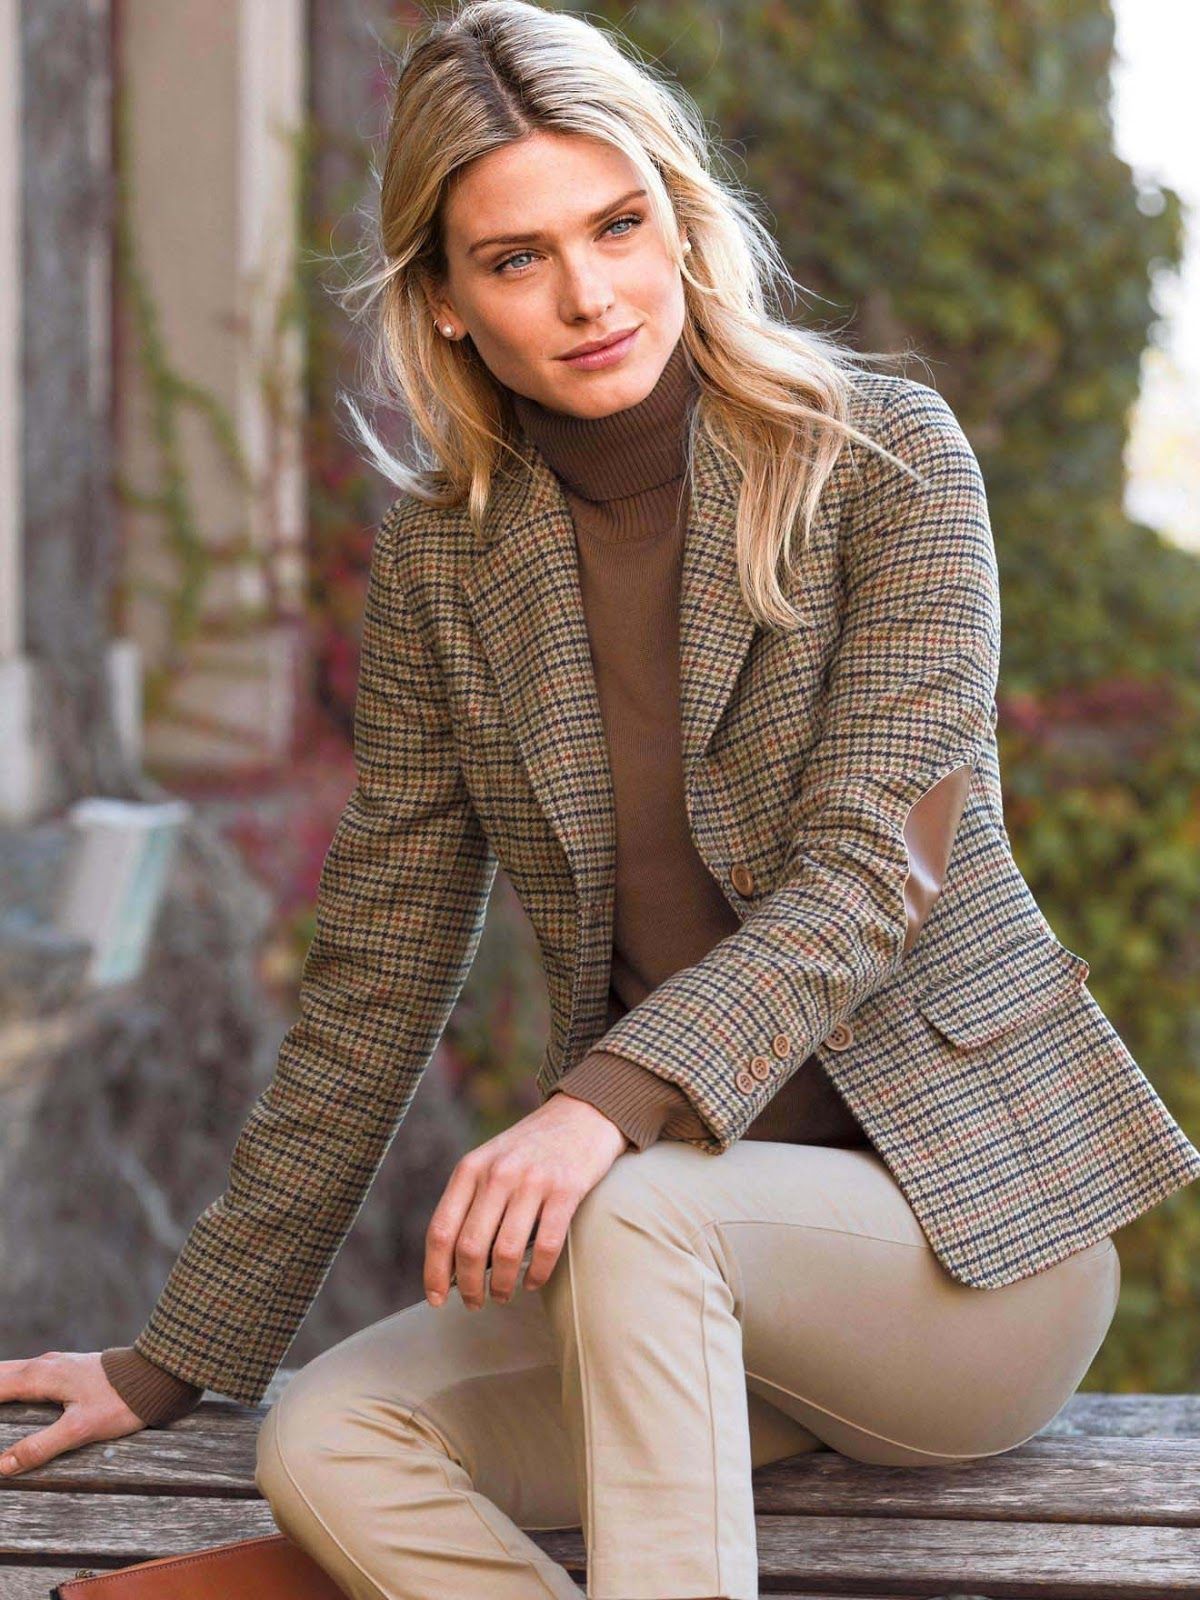 Classic Charm: Tweed Blazers for Timeless Sophistication